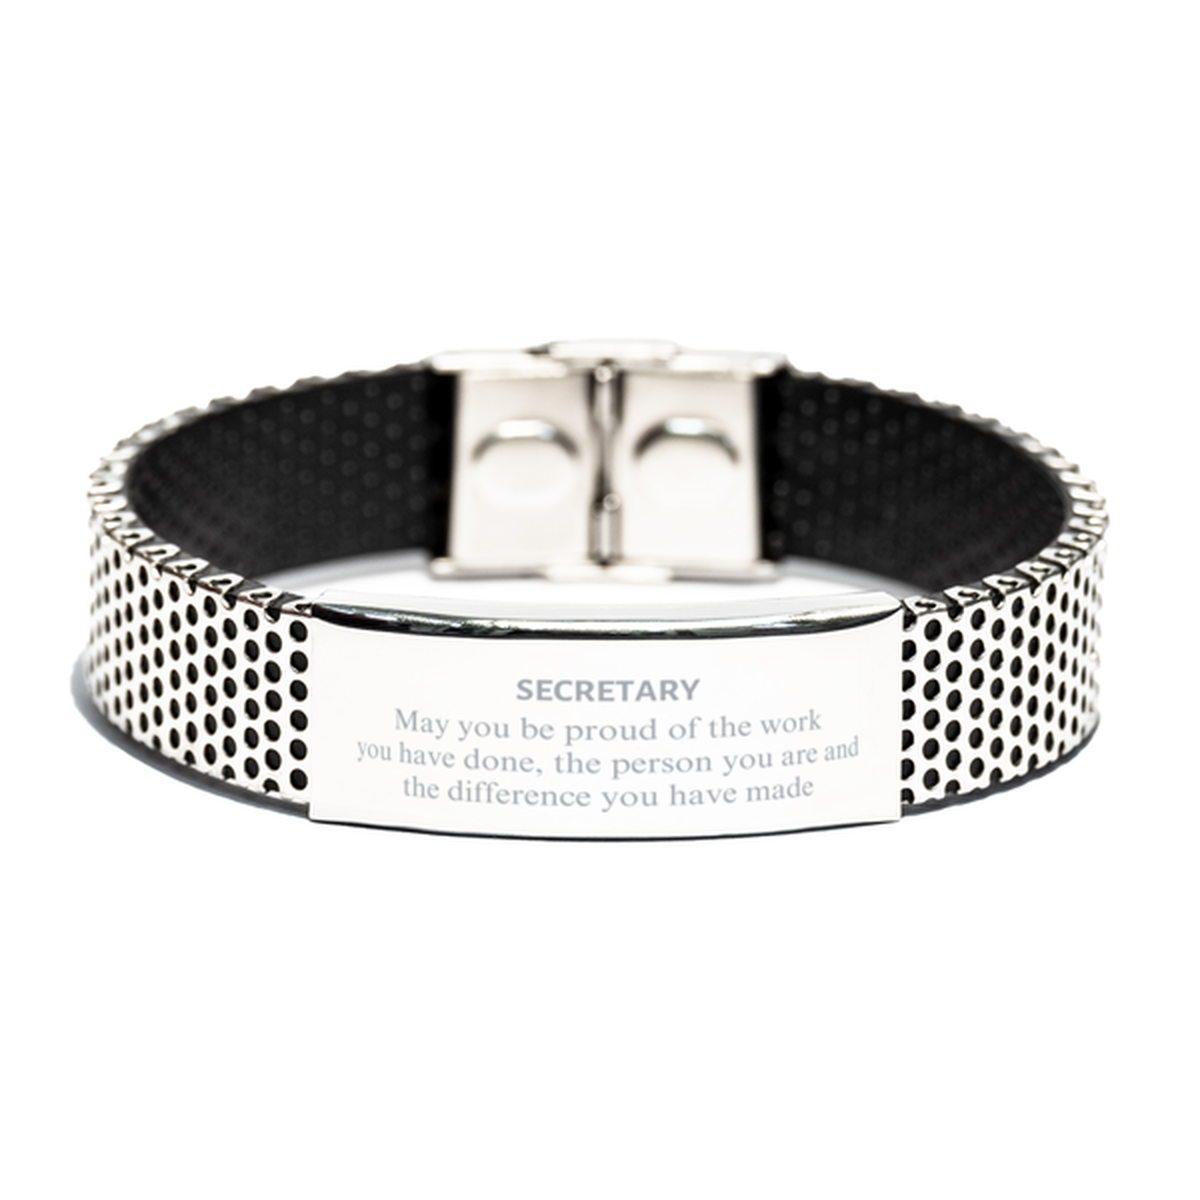 Secretary May you be proud of the work you have done, Retirement Secretary Stainless Steel Bracelet for Colleague Appreciation Gifts Amazing for Secretary